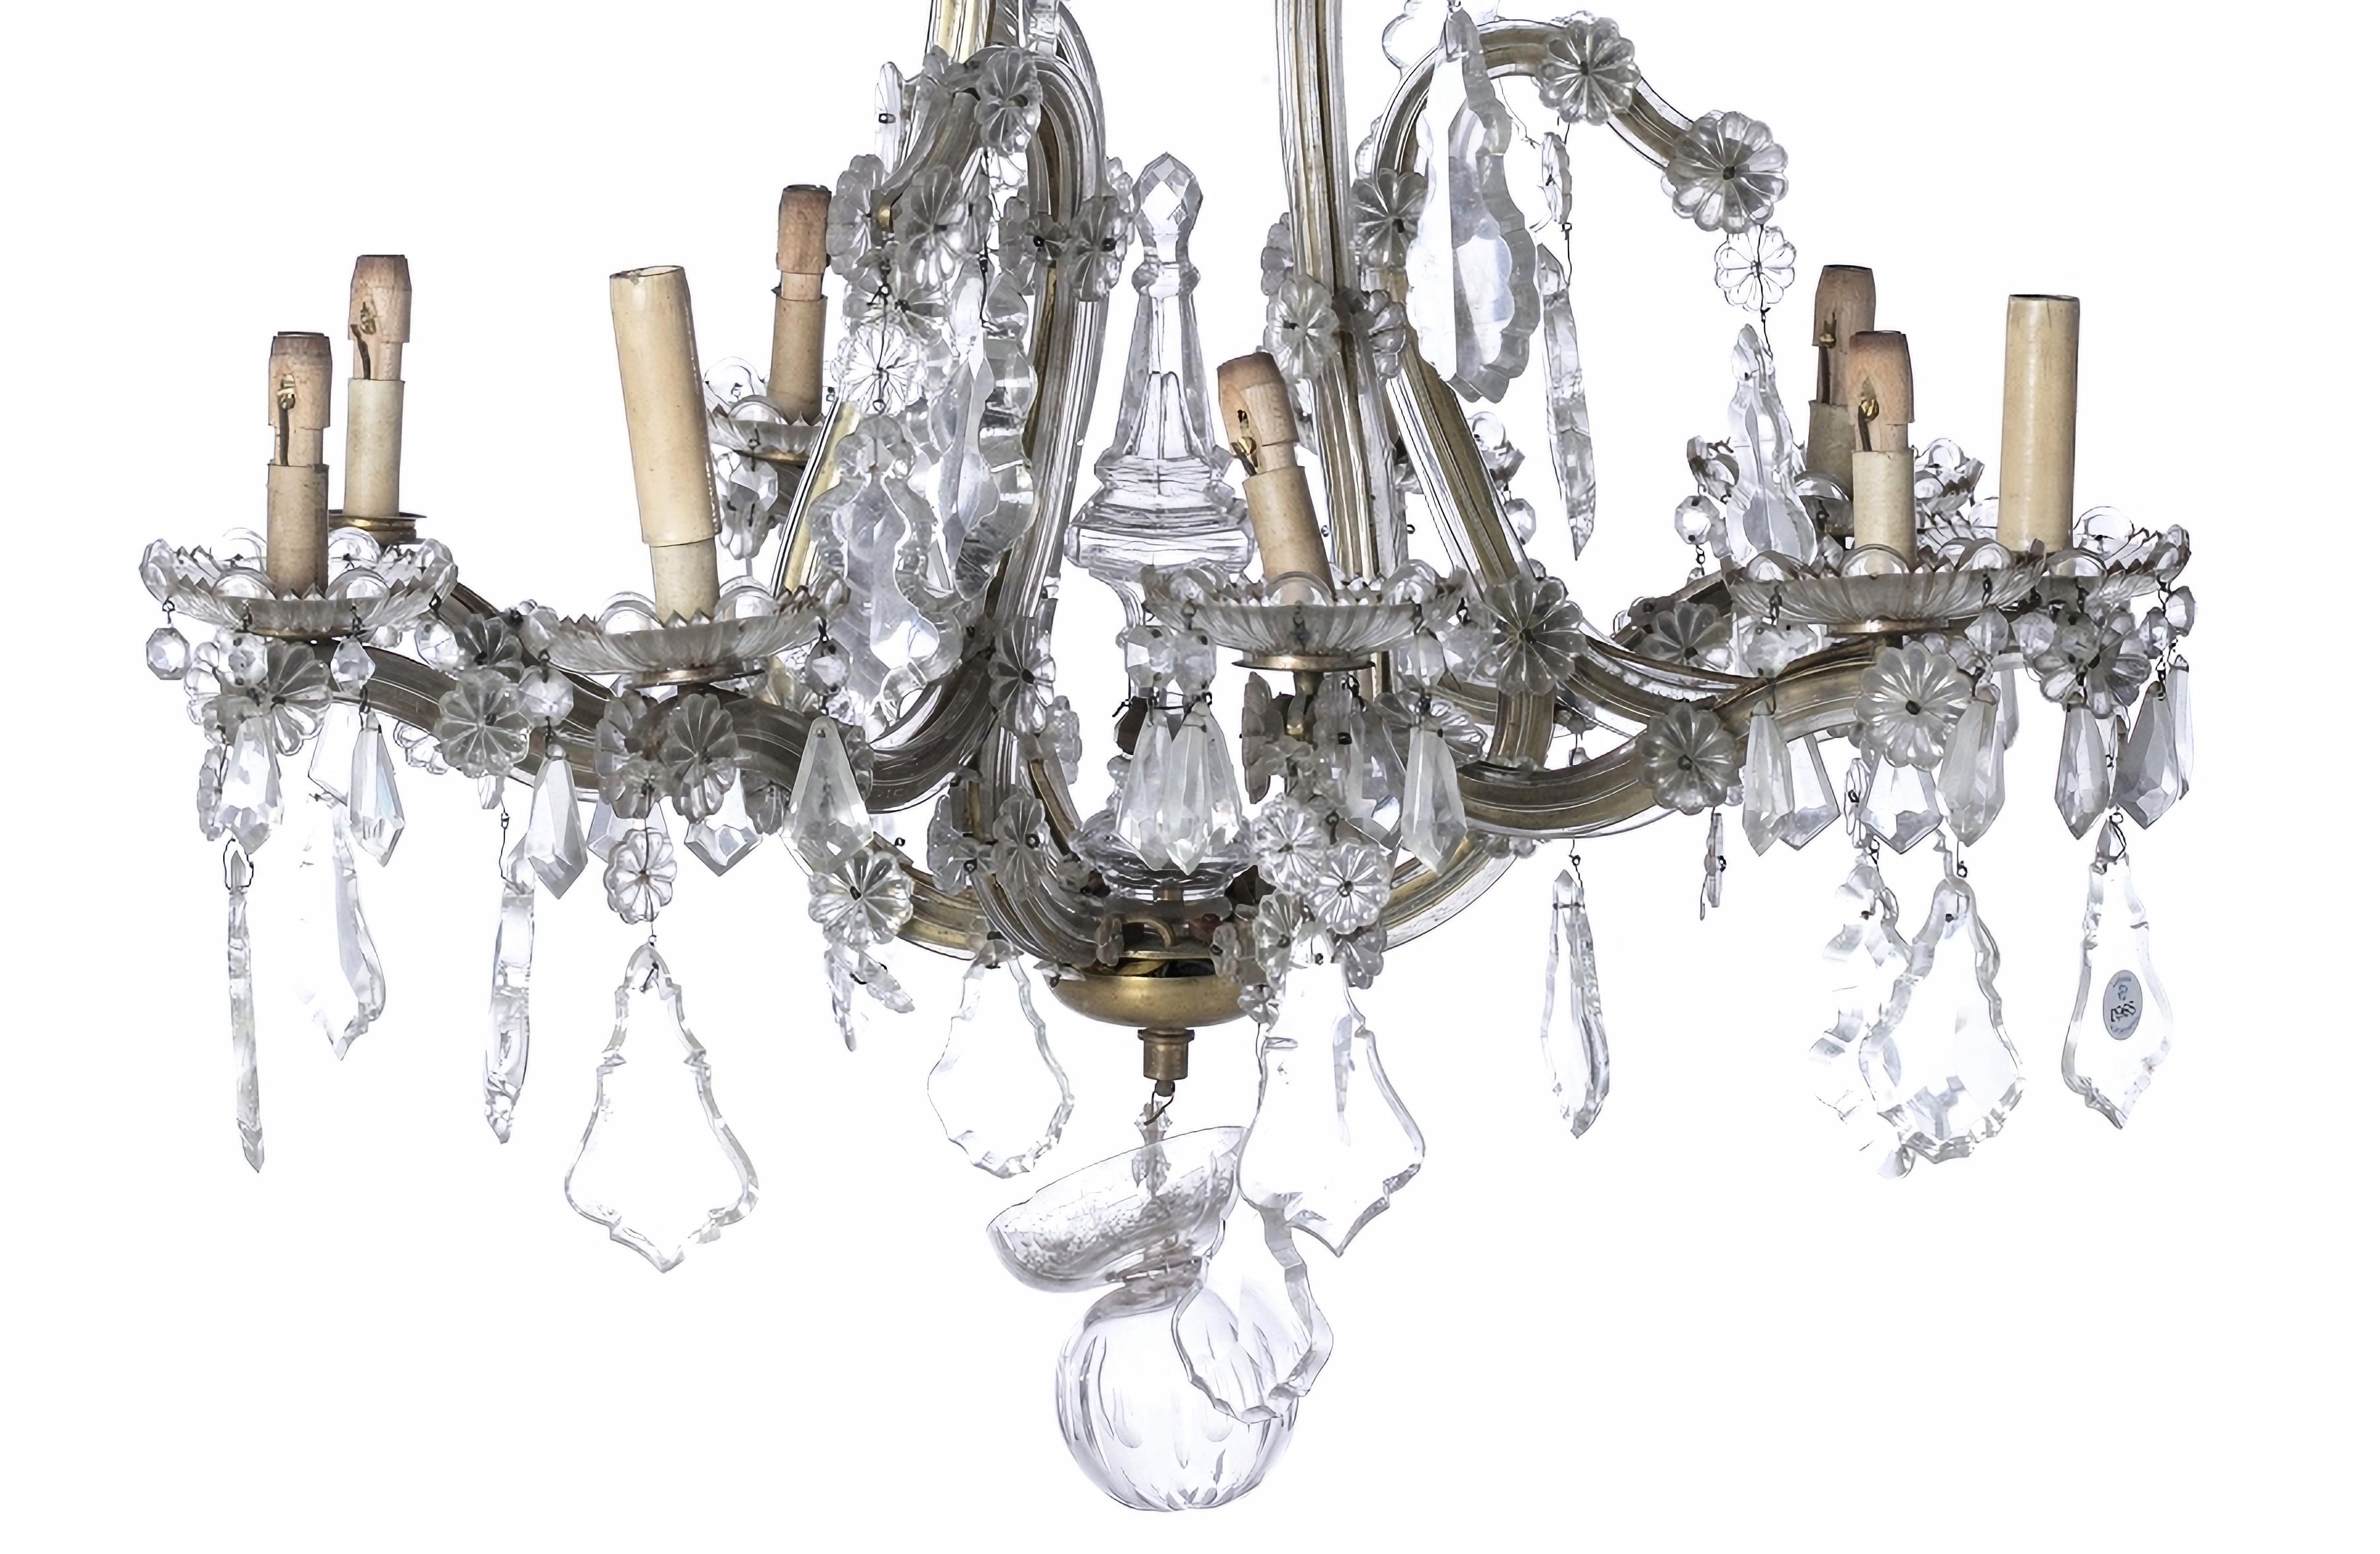 Hand-Crafted Nine Light Chandelier Portuguese Began 20th Century For Sale